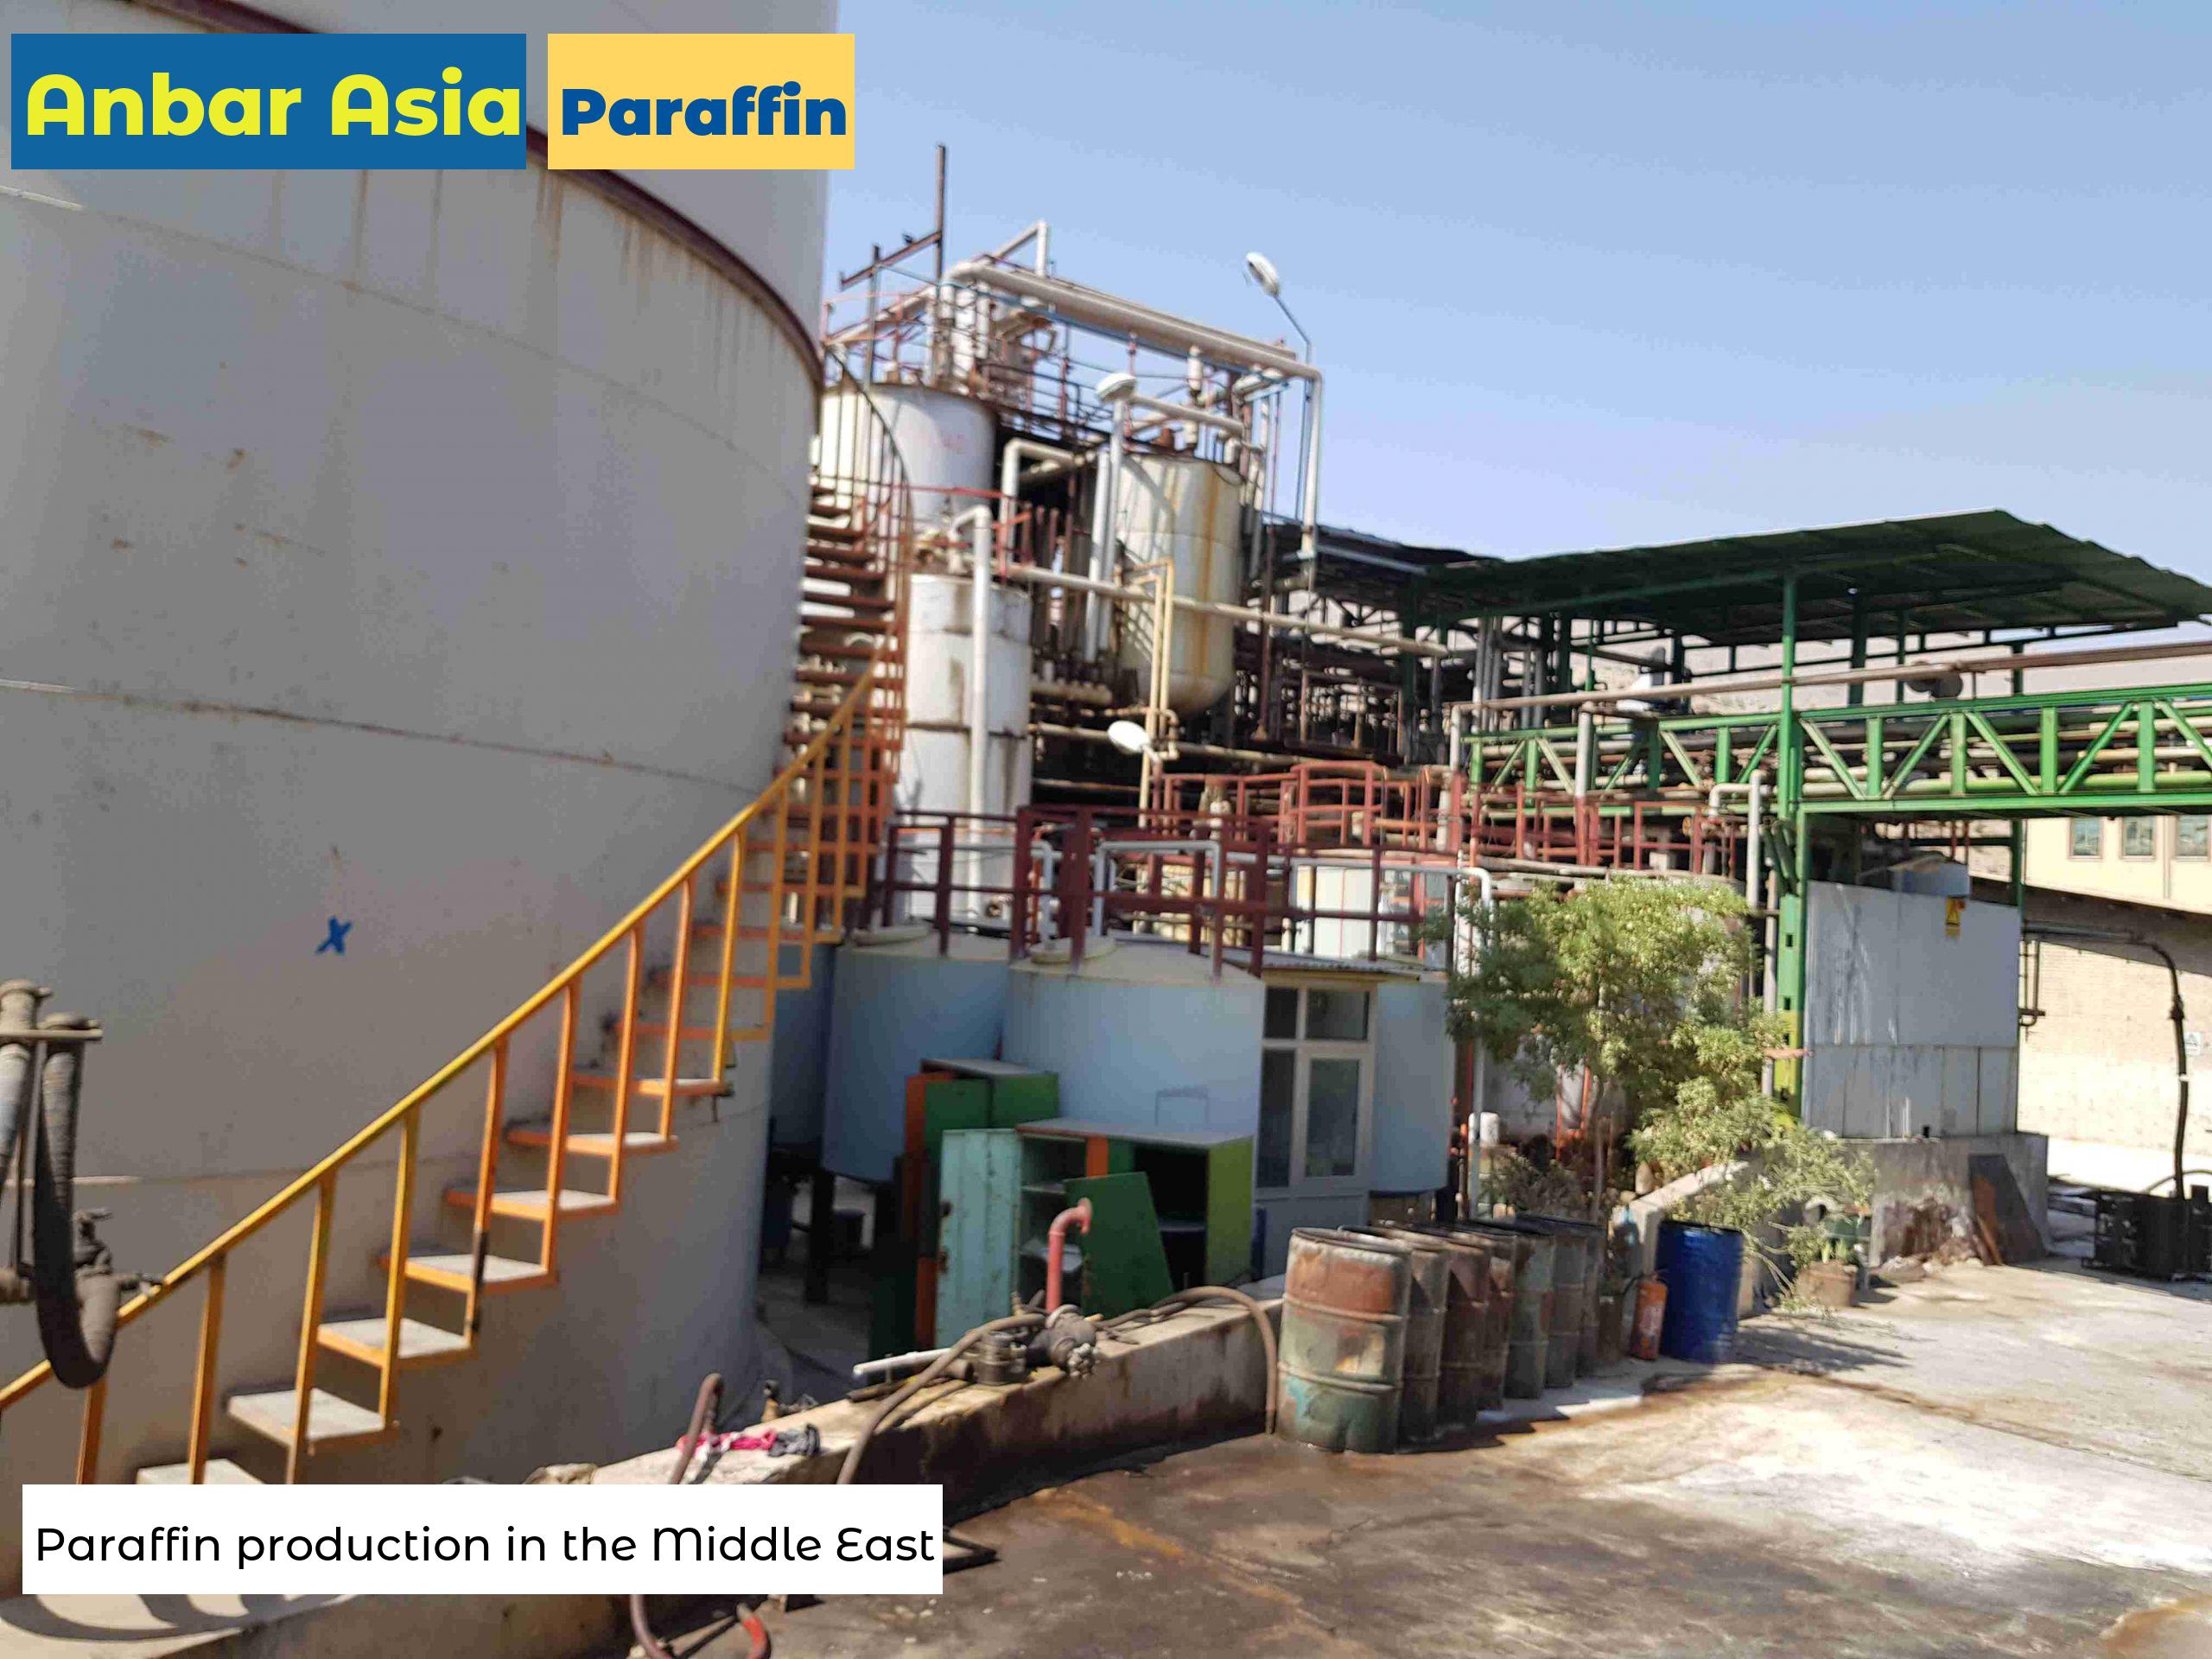 Paraffin production in the Middle East